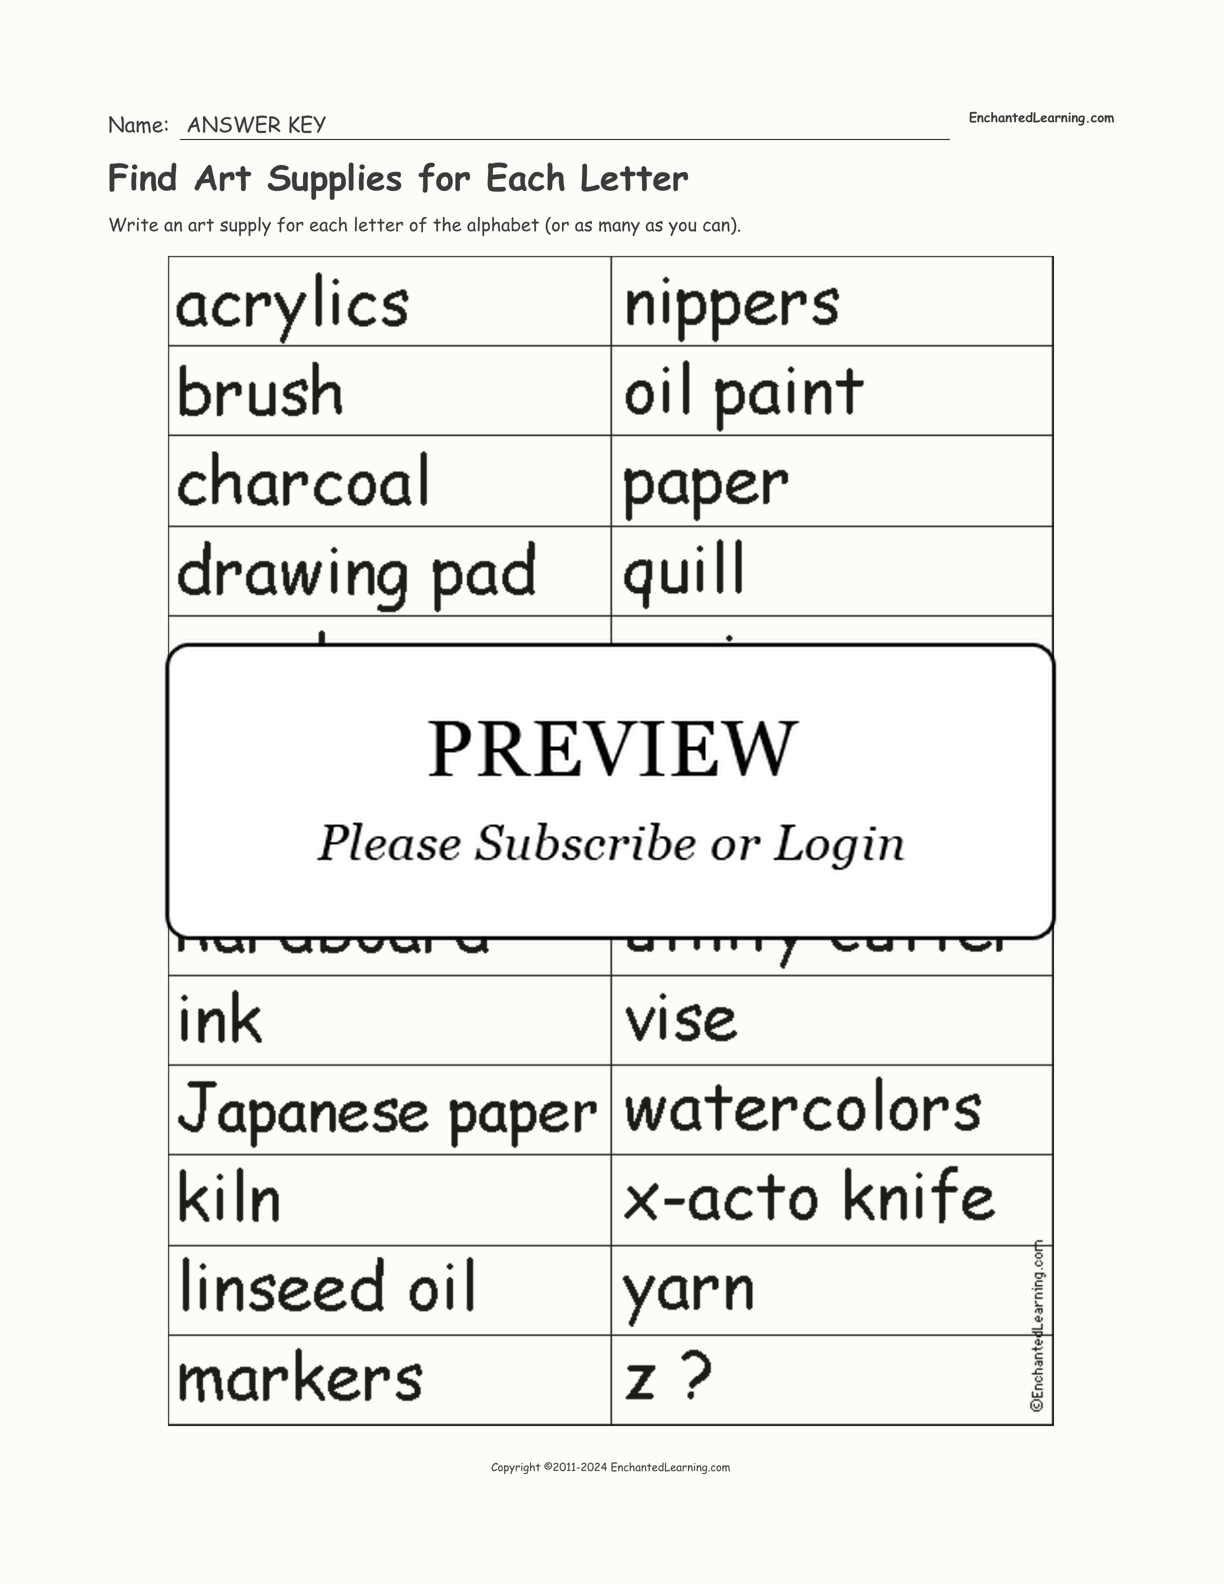 Find Art Supplies for Each Letter interactive worksheet page 2